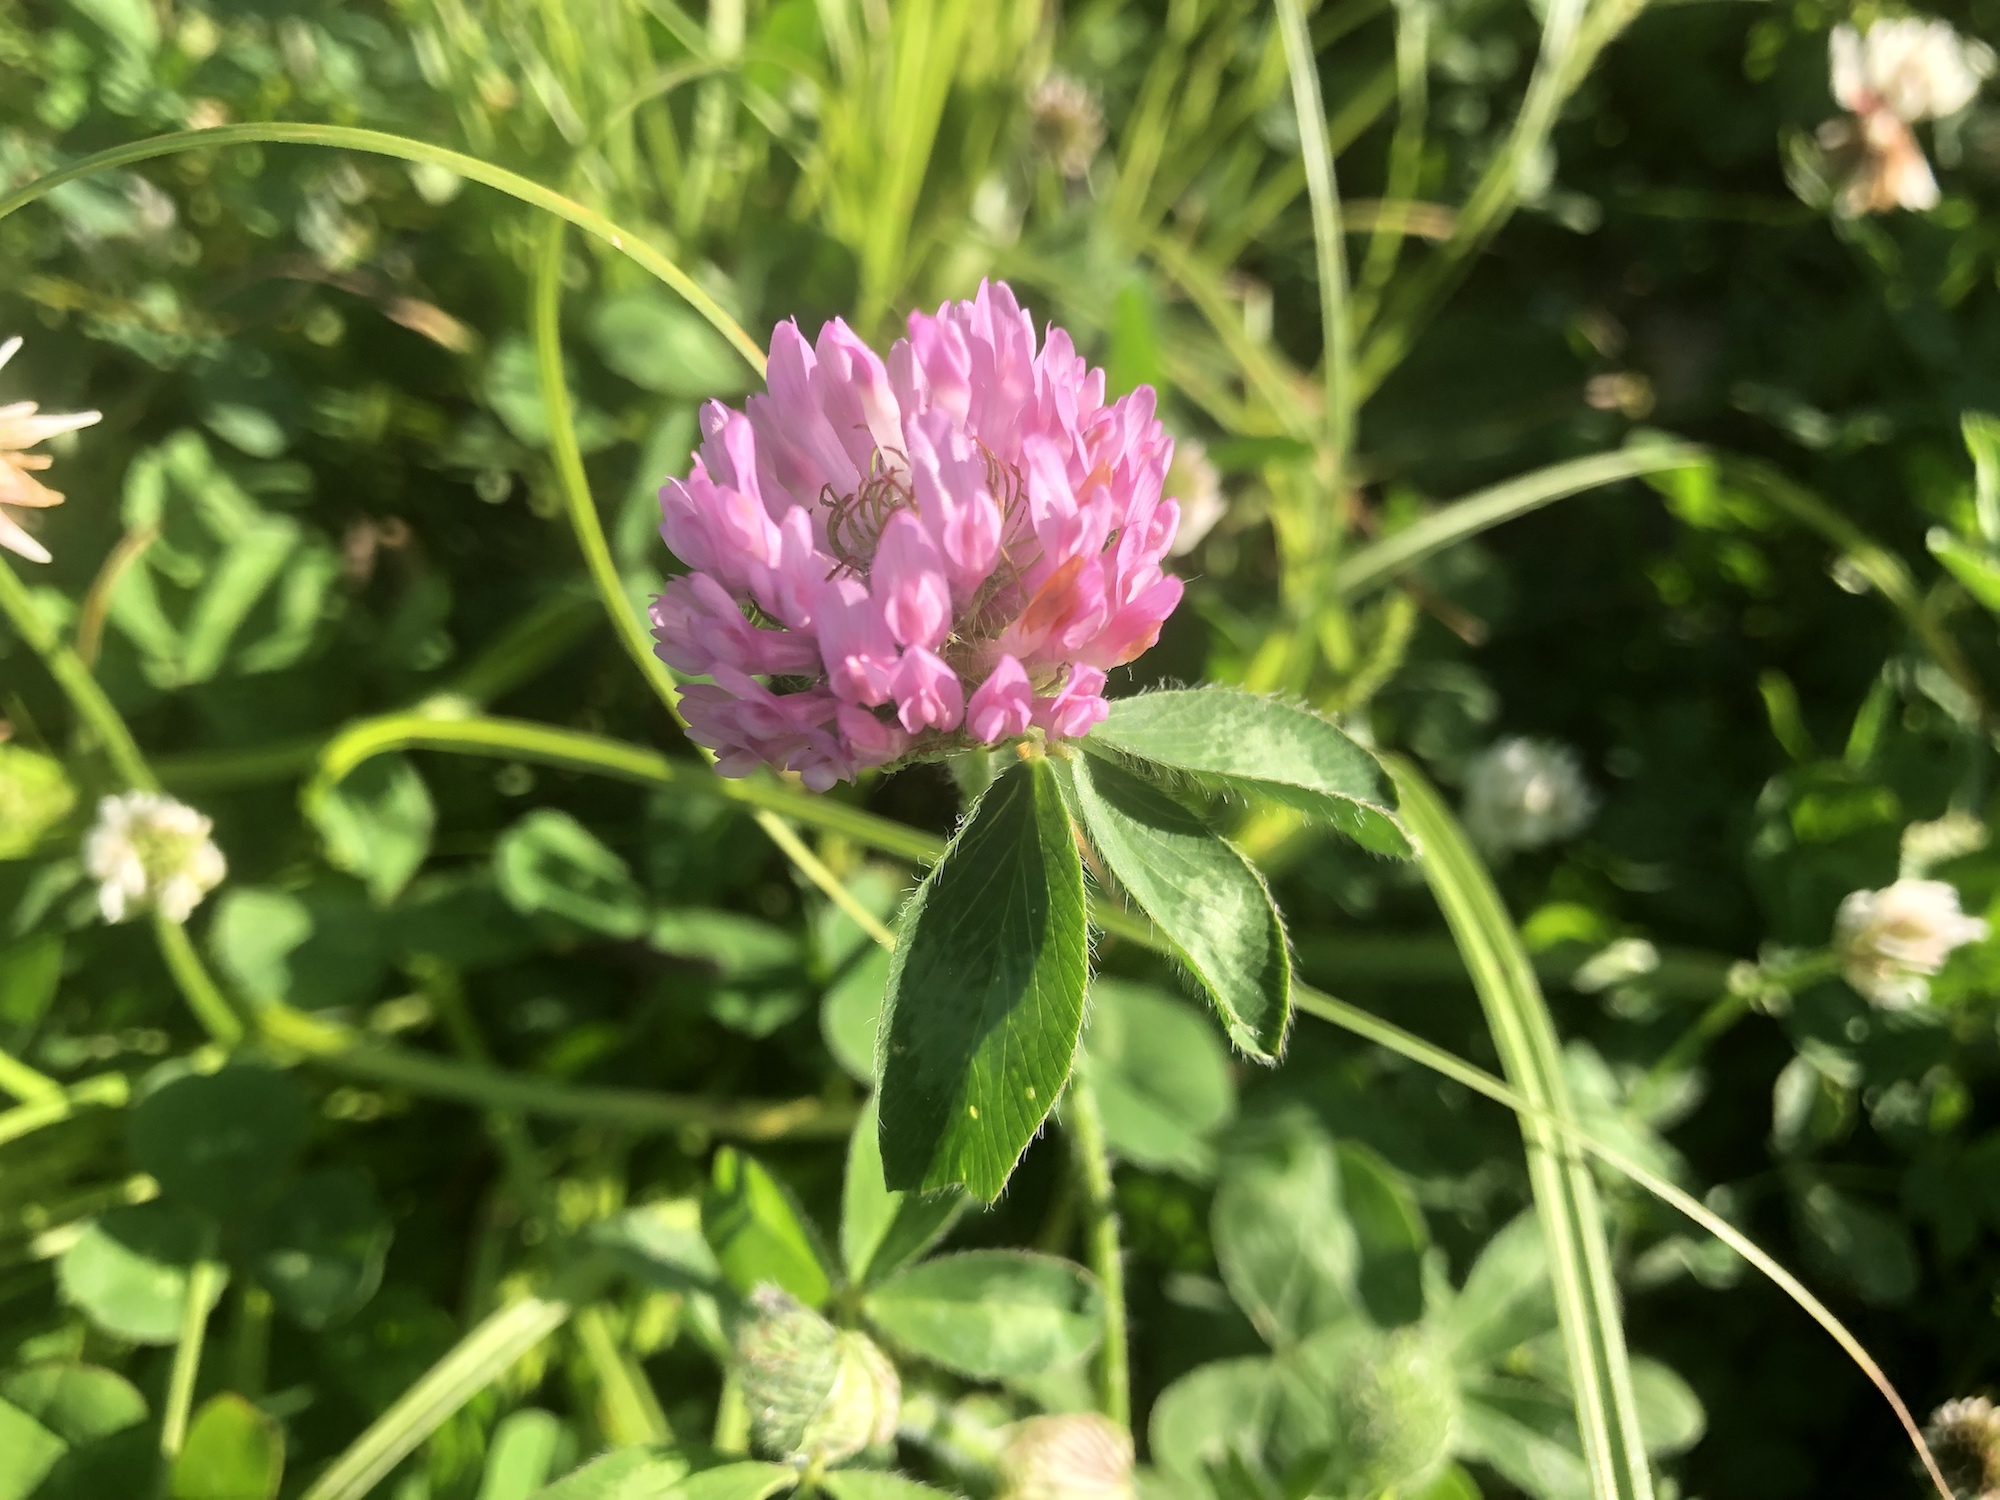 Red Clover around retaining pond at the corner of Manitou Way and Nakoma Road in Madison, Wisconsin on June 10, 2019.